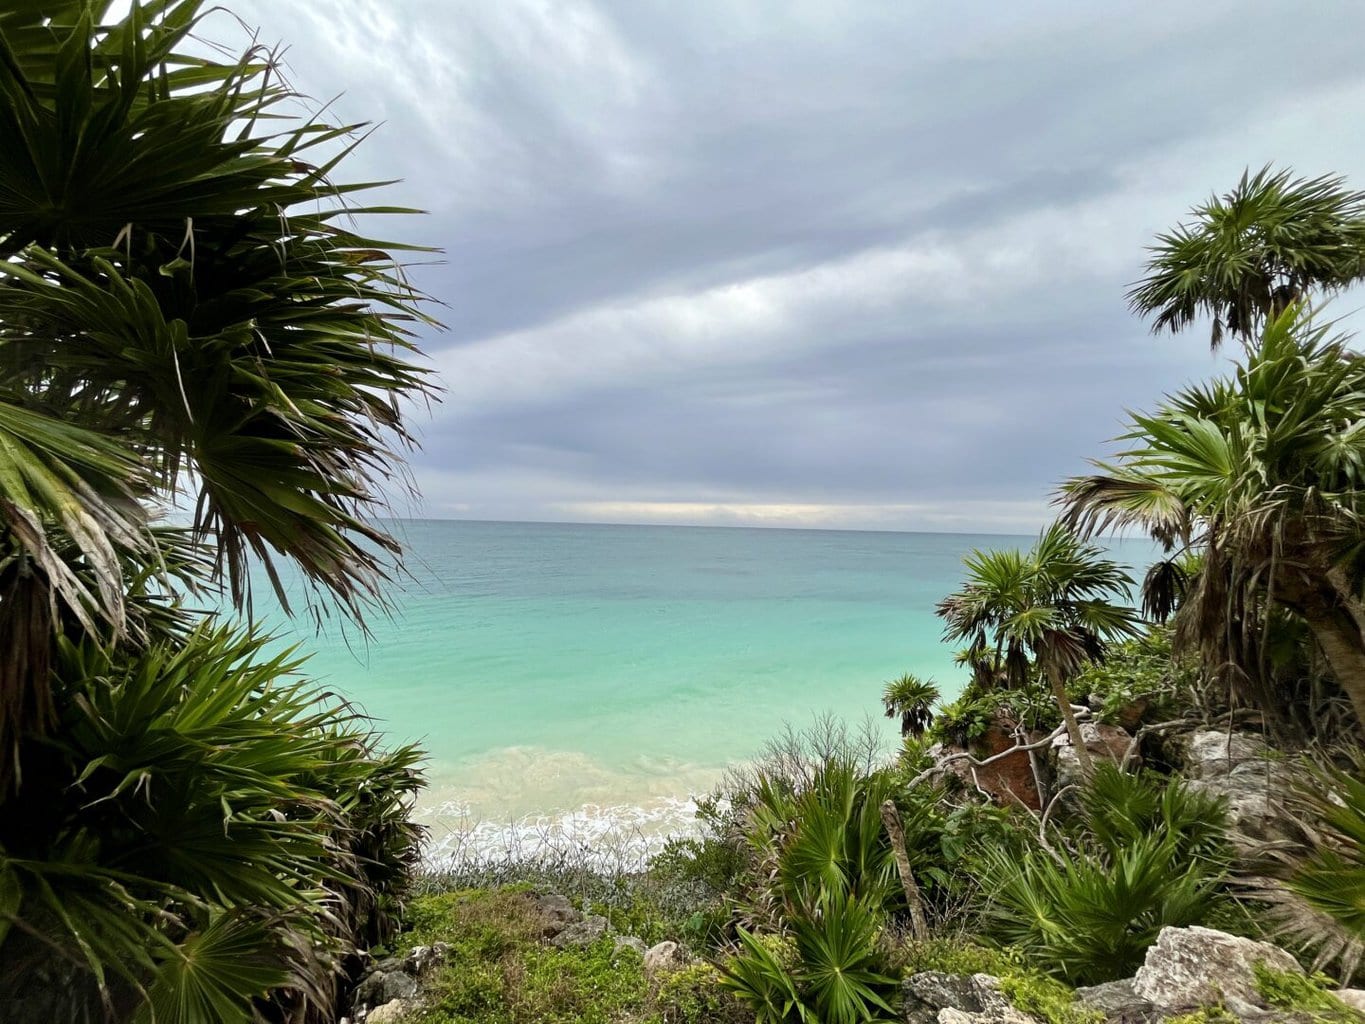 Tulum was a major Mayan city and served as a significant port during the late Postclassic period (AD 1200 to 1521). The ruins are situated on the cliffs along the Caribbean Sea and are known for their stunning coastal views.